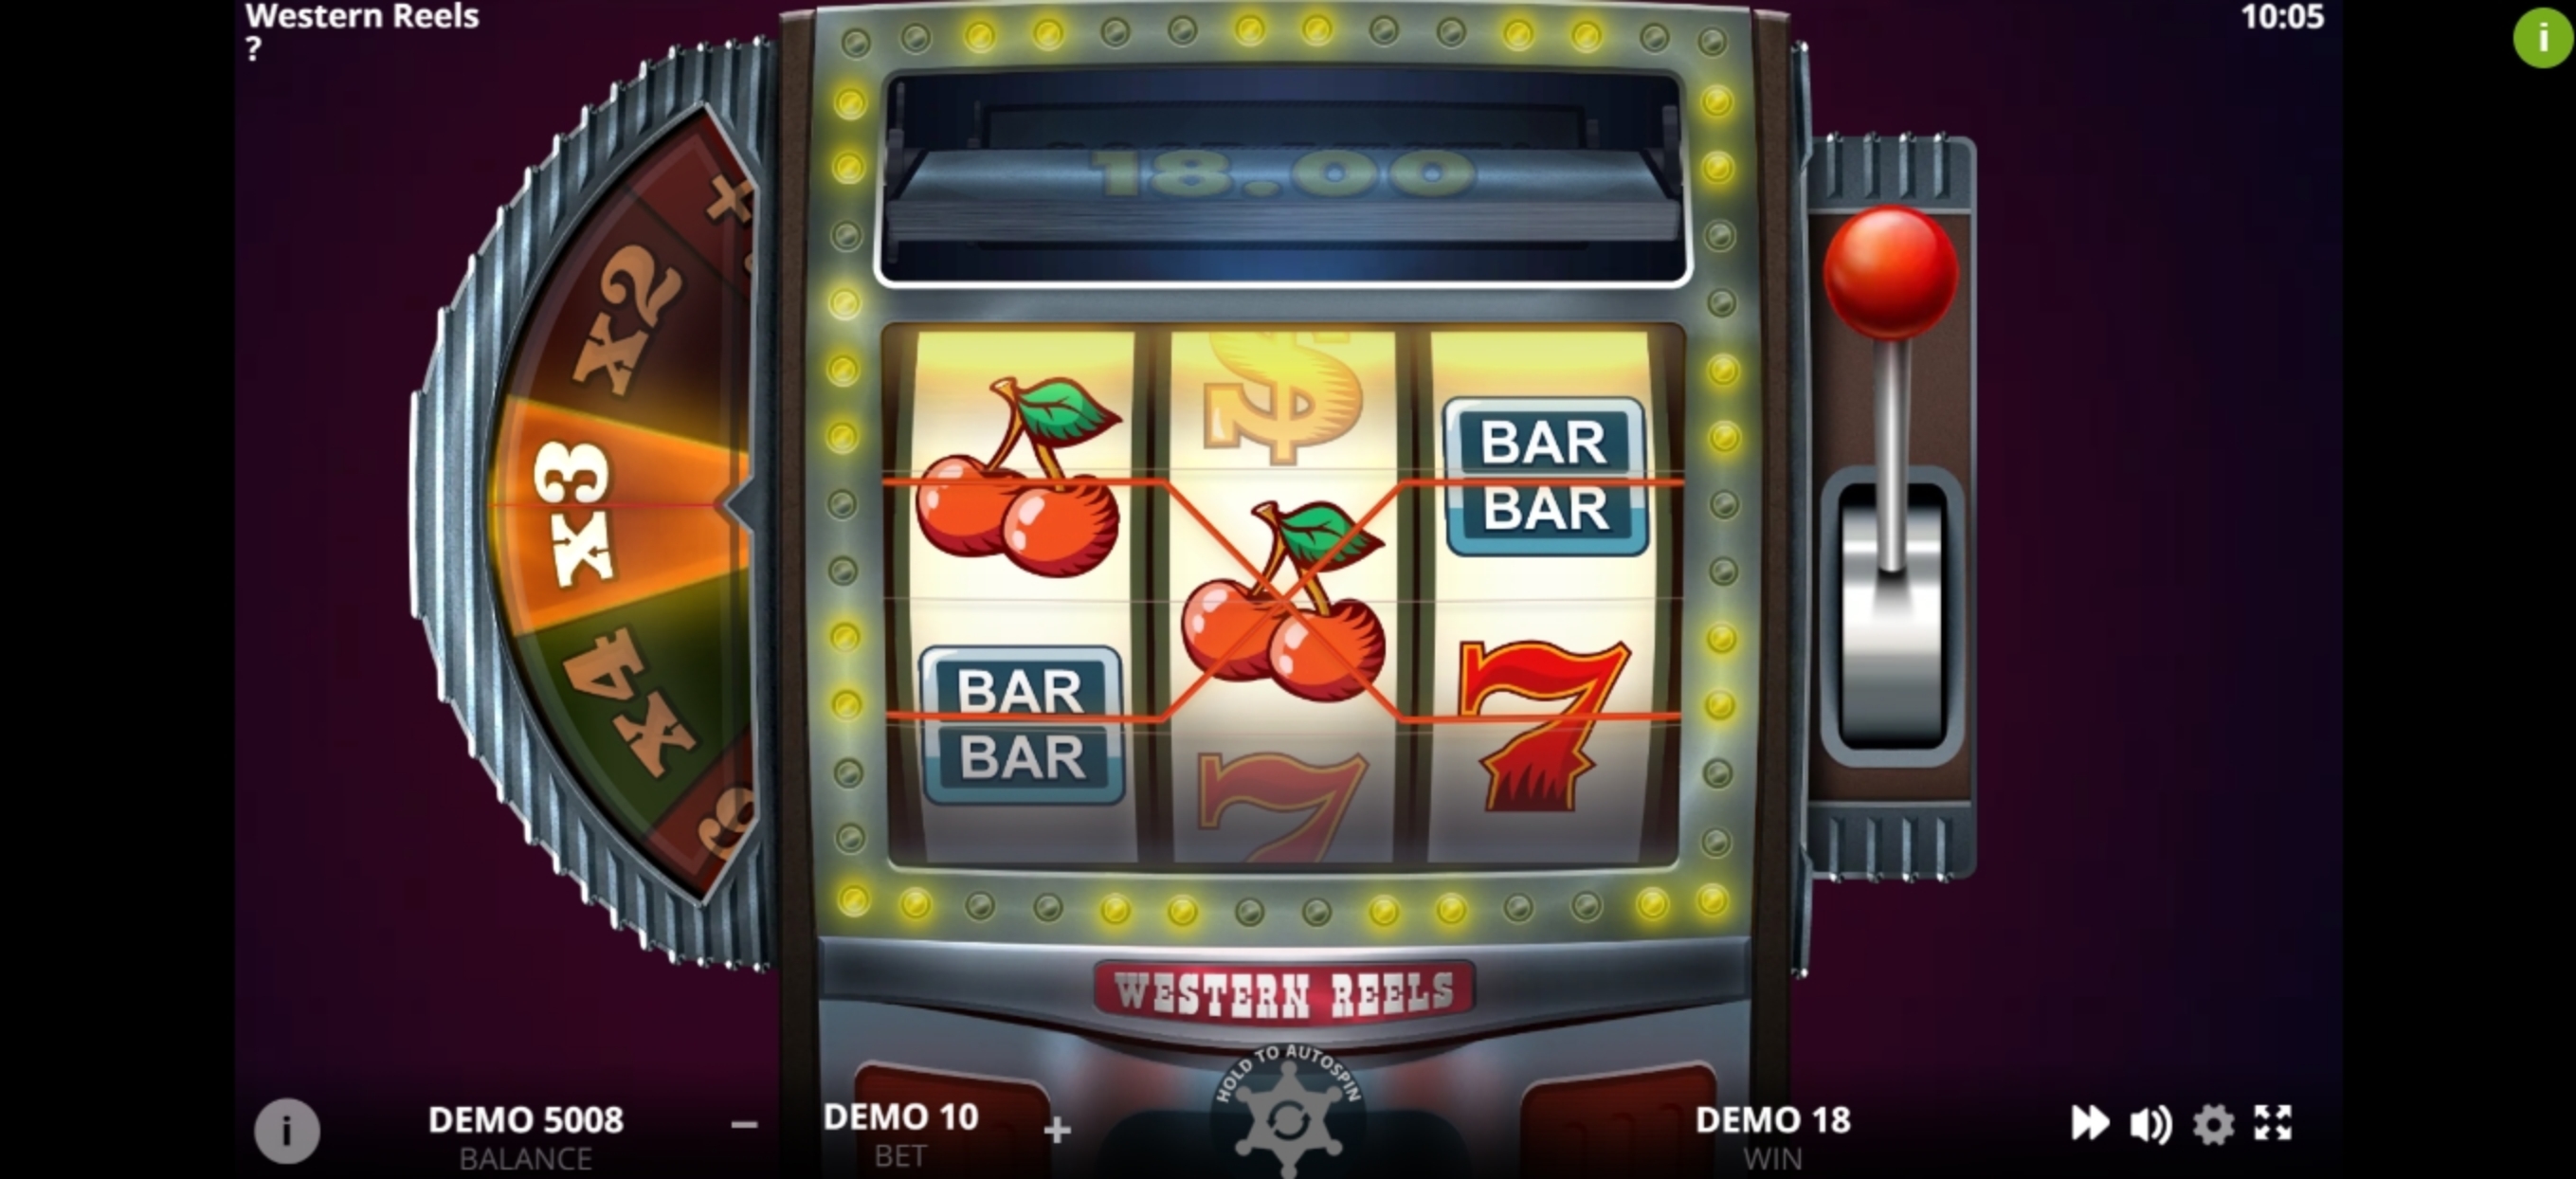 Win Money in Western Reels Free Slot Game by Evoplay Entertainment